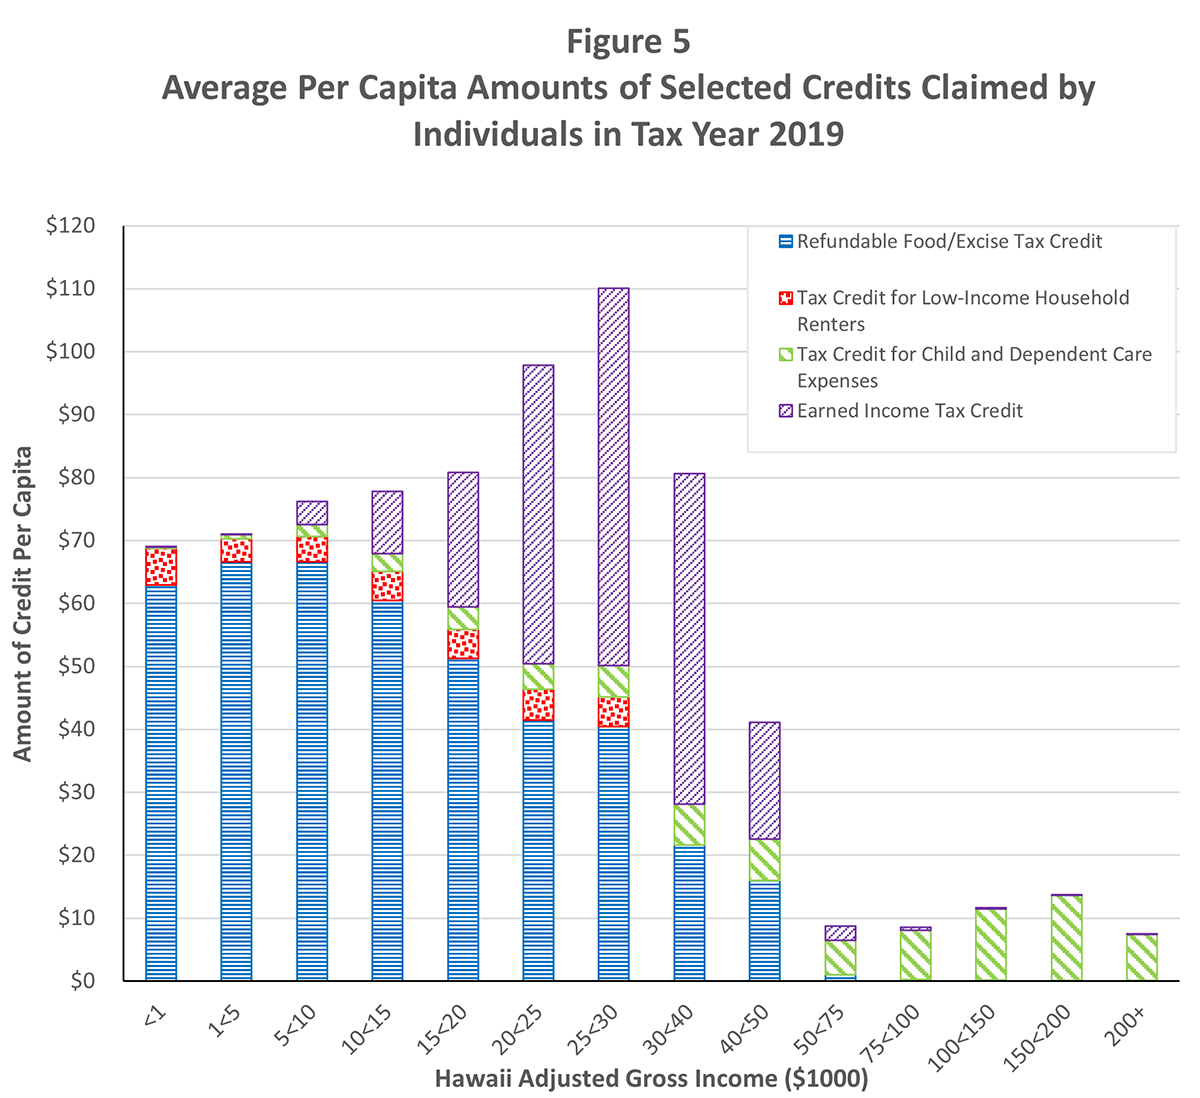 Figure 5 - Average Per Capita Smounts of Selected Credits Claimed by Individuals in Tax Year 2019